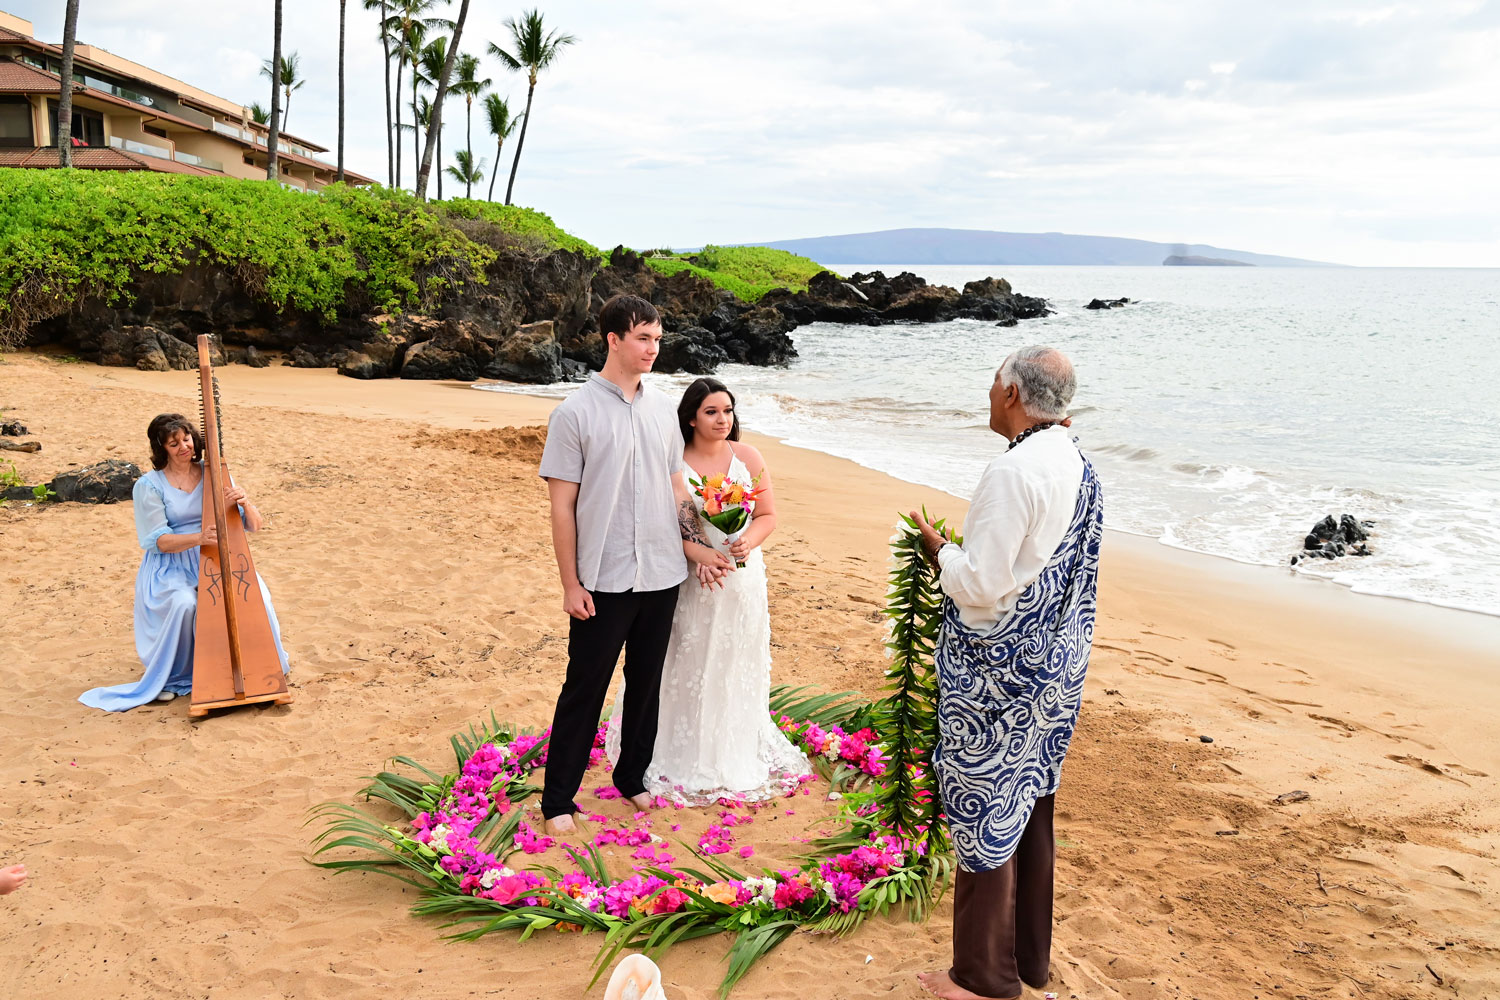 Maui's Wedding from the Heart